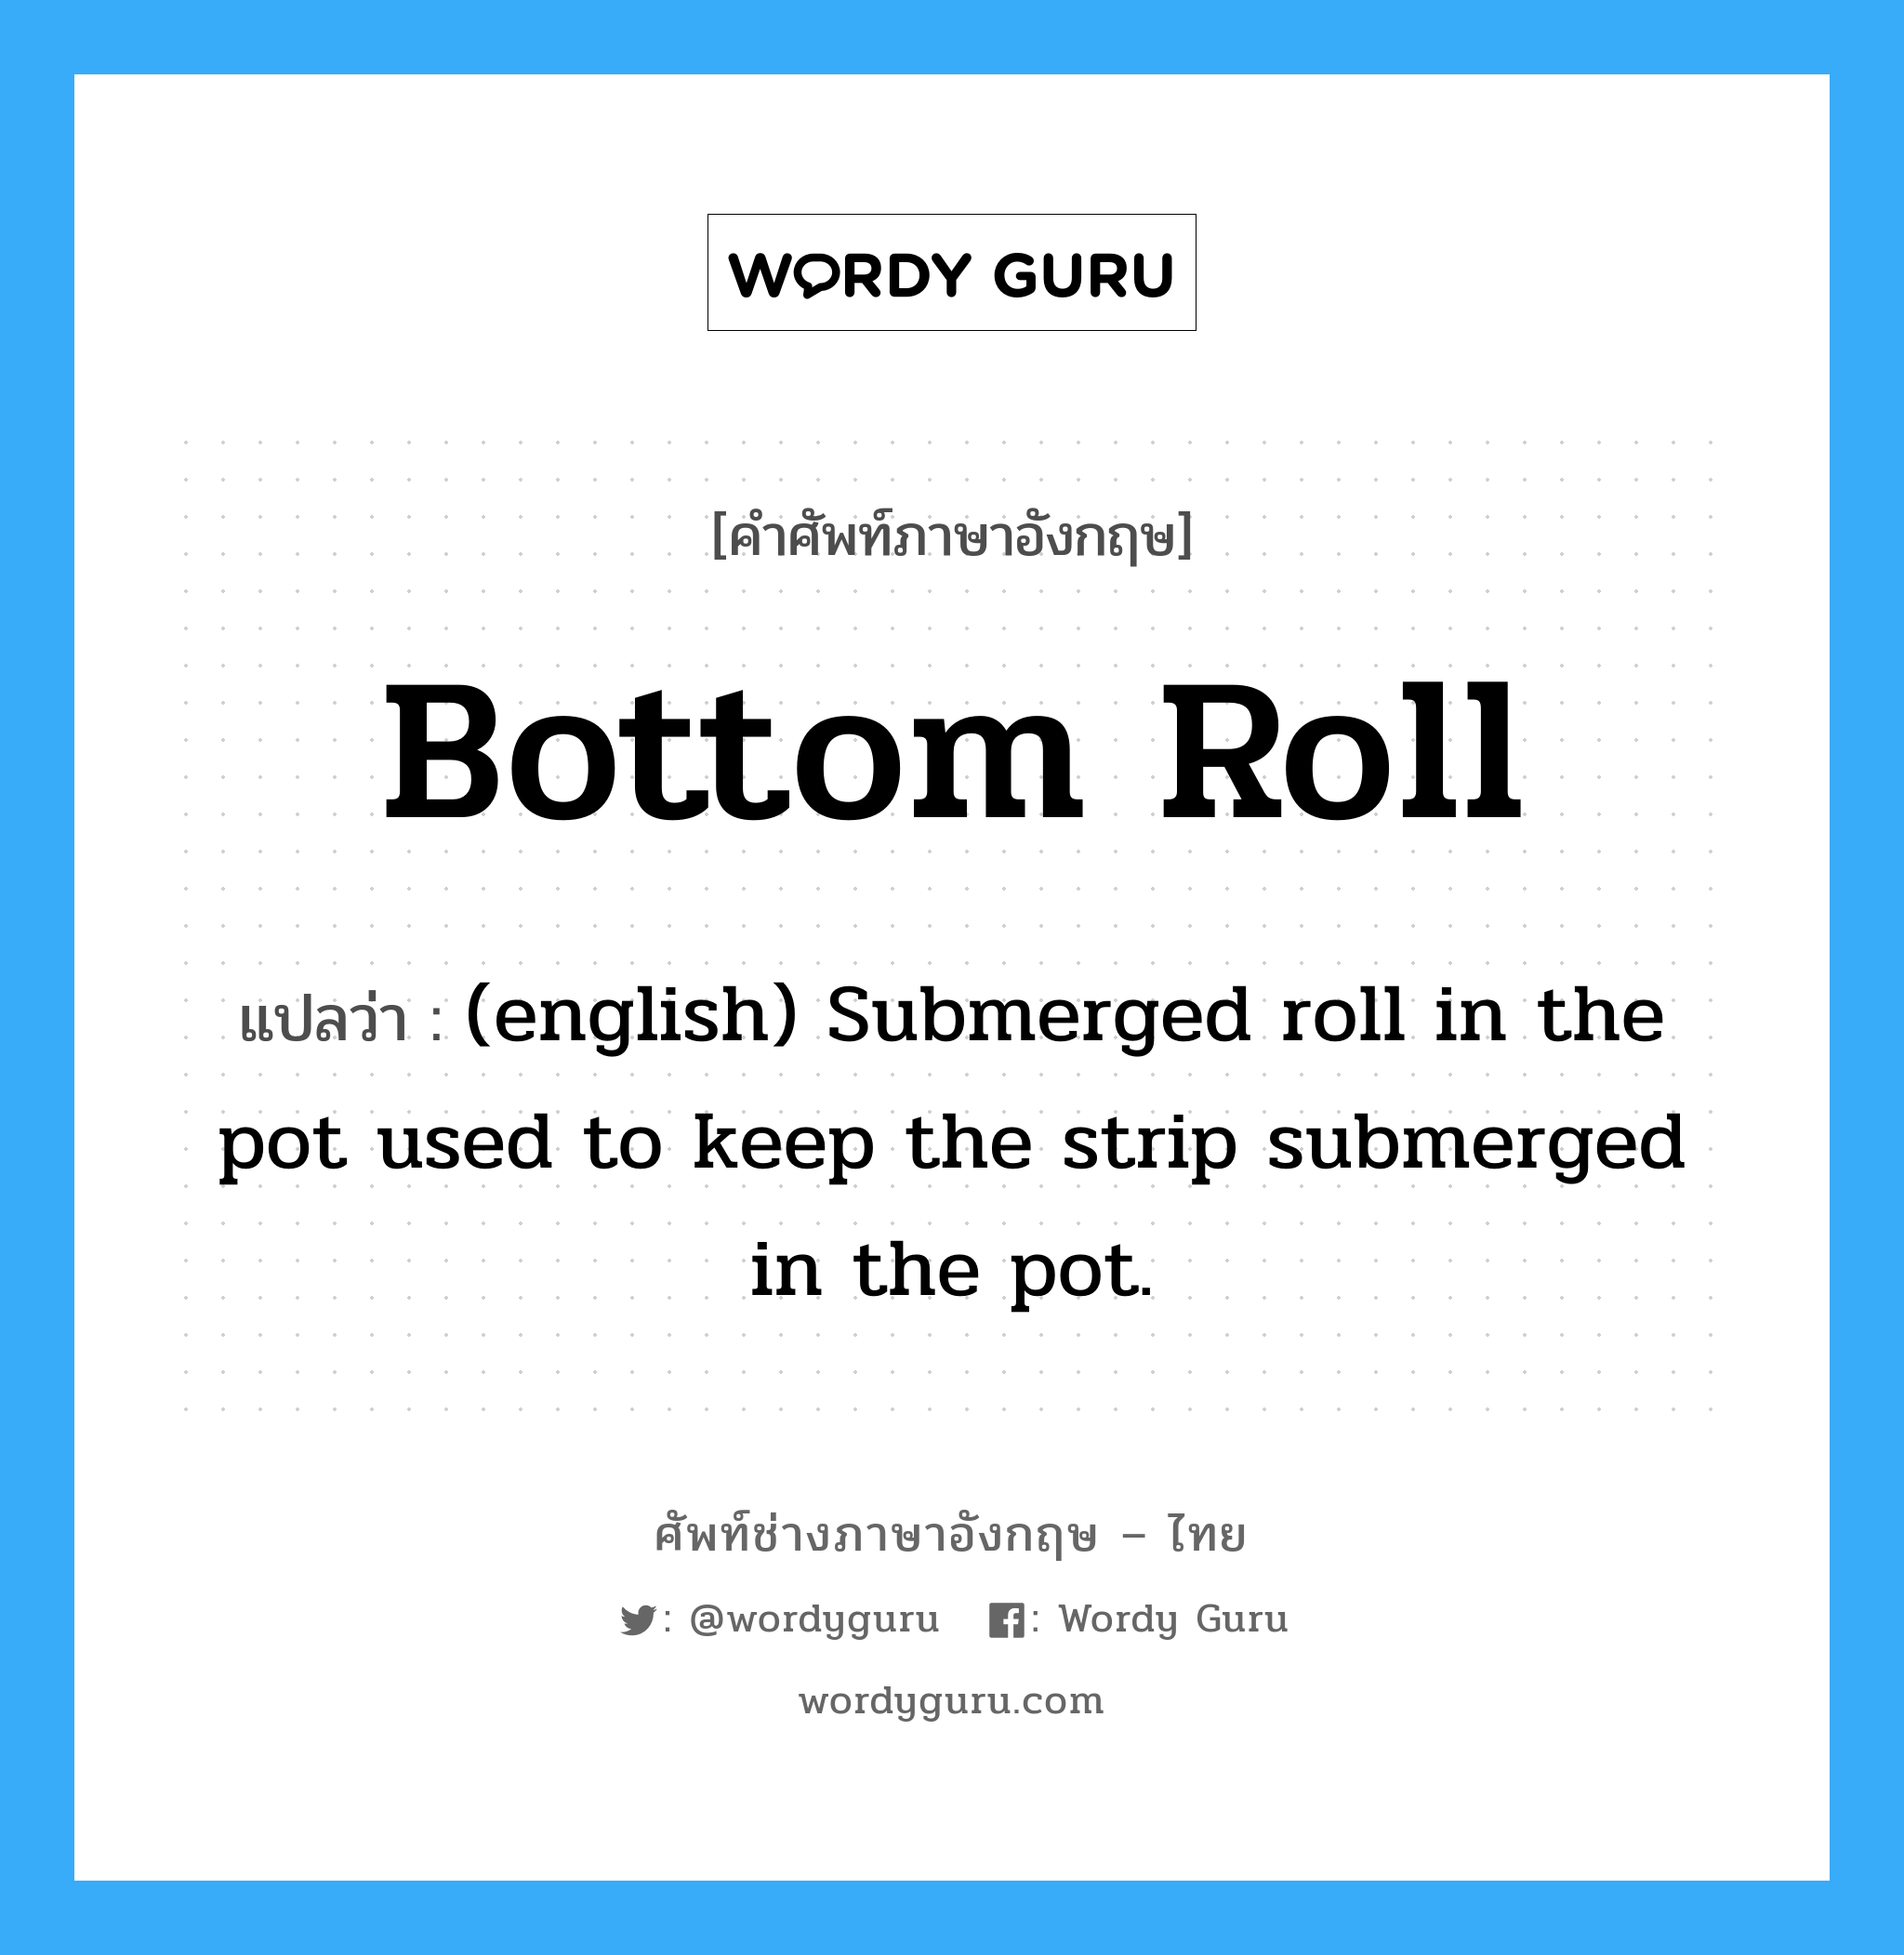 Bottom Roll แปลว่า?, คำศัพท์ช่างภาษาอังกฤษ - ไทย Bottom Roll คำศัพท์ภาษาอังกฤษ Bottom Roll แปลว่า (english) Submerged roll in the pot used to keep the strip submerged in the pot.